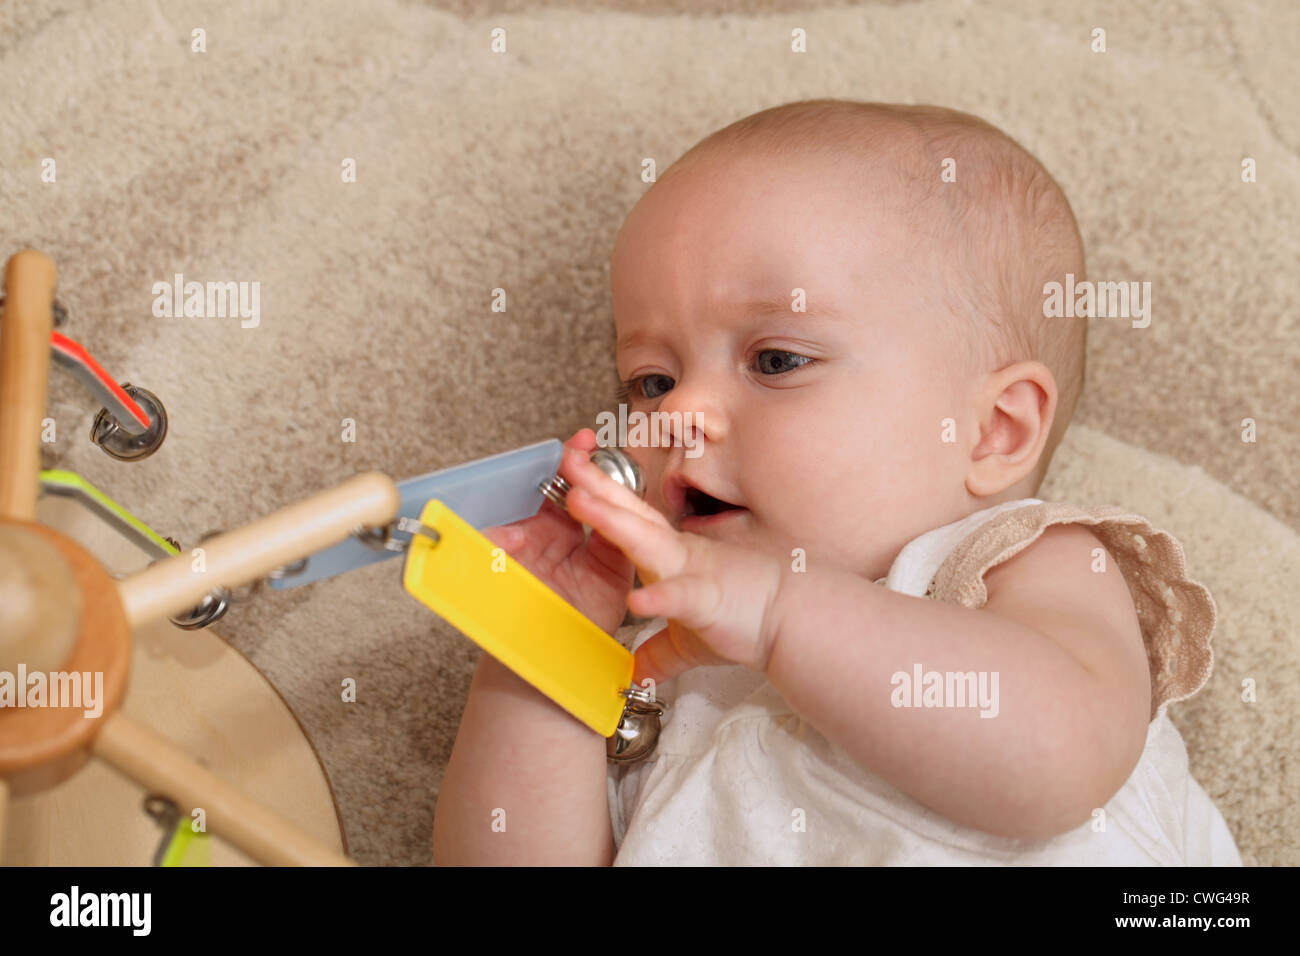 A 6 month old baby girl laying on a baby blanket and playing with a mobile Stock Photo